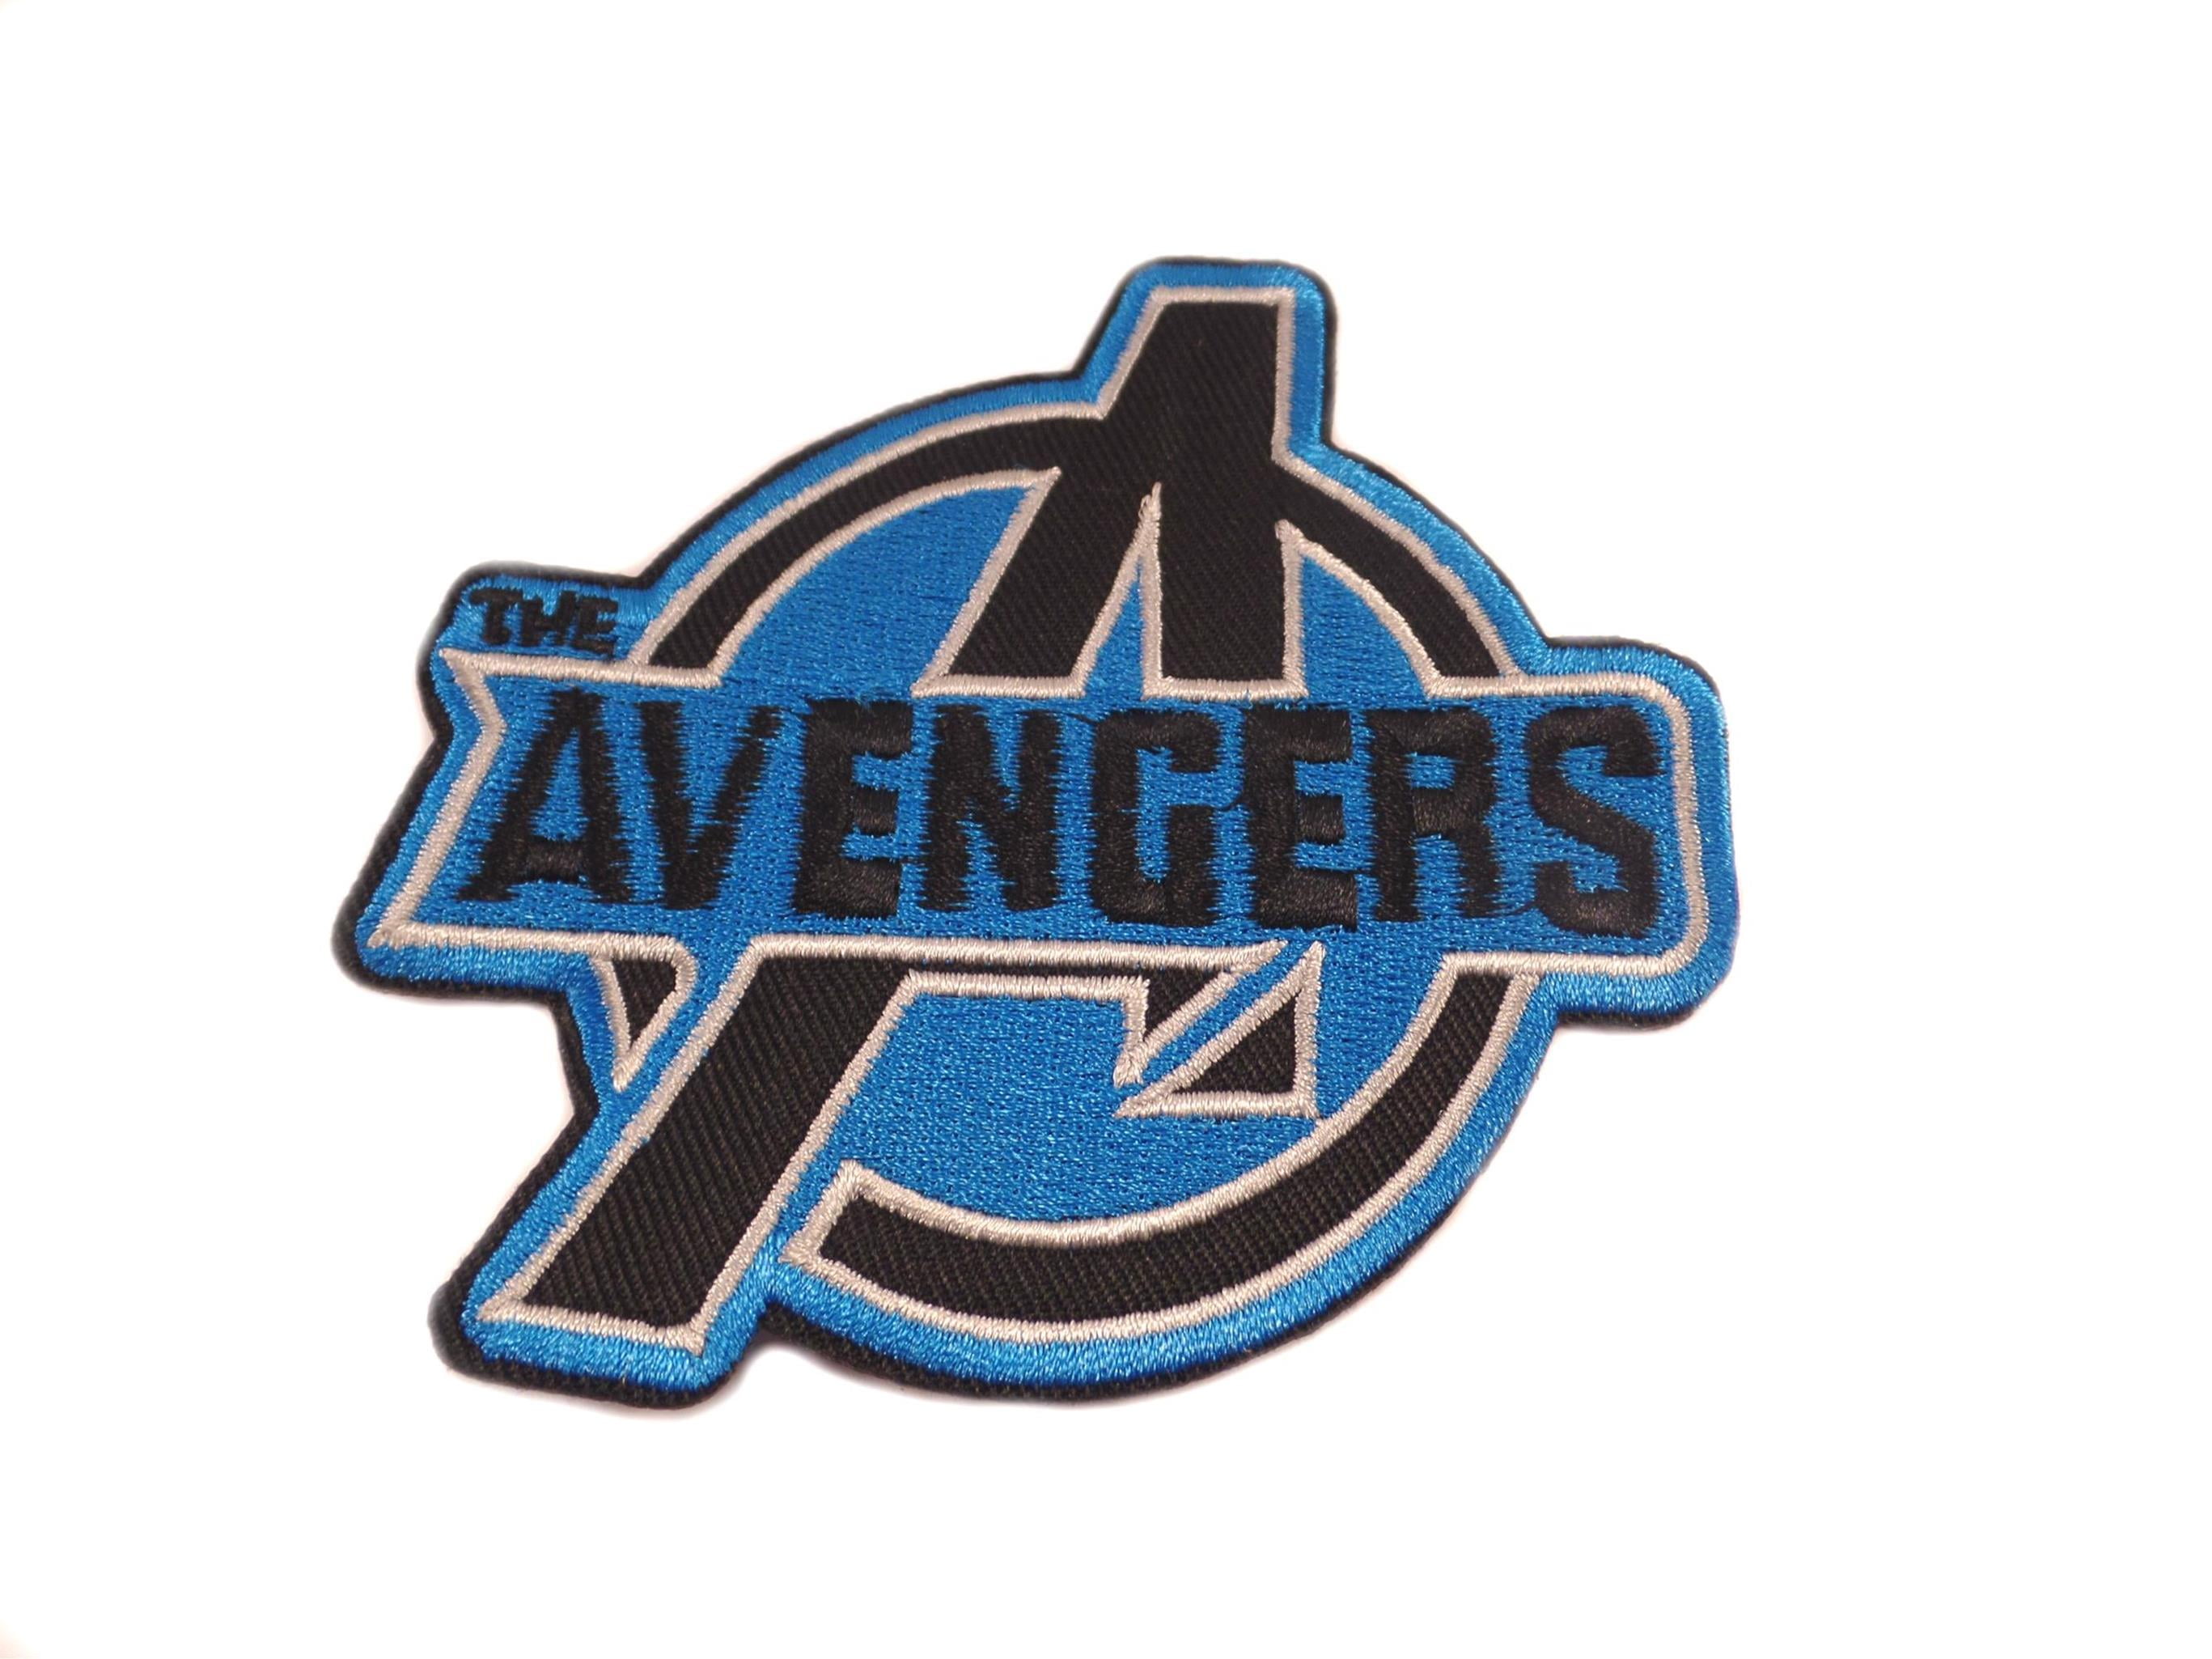 The Avengers A Logo 3" Tall Embroidered Iron on Patch